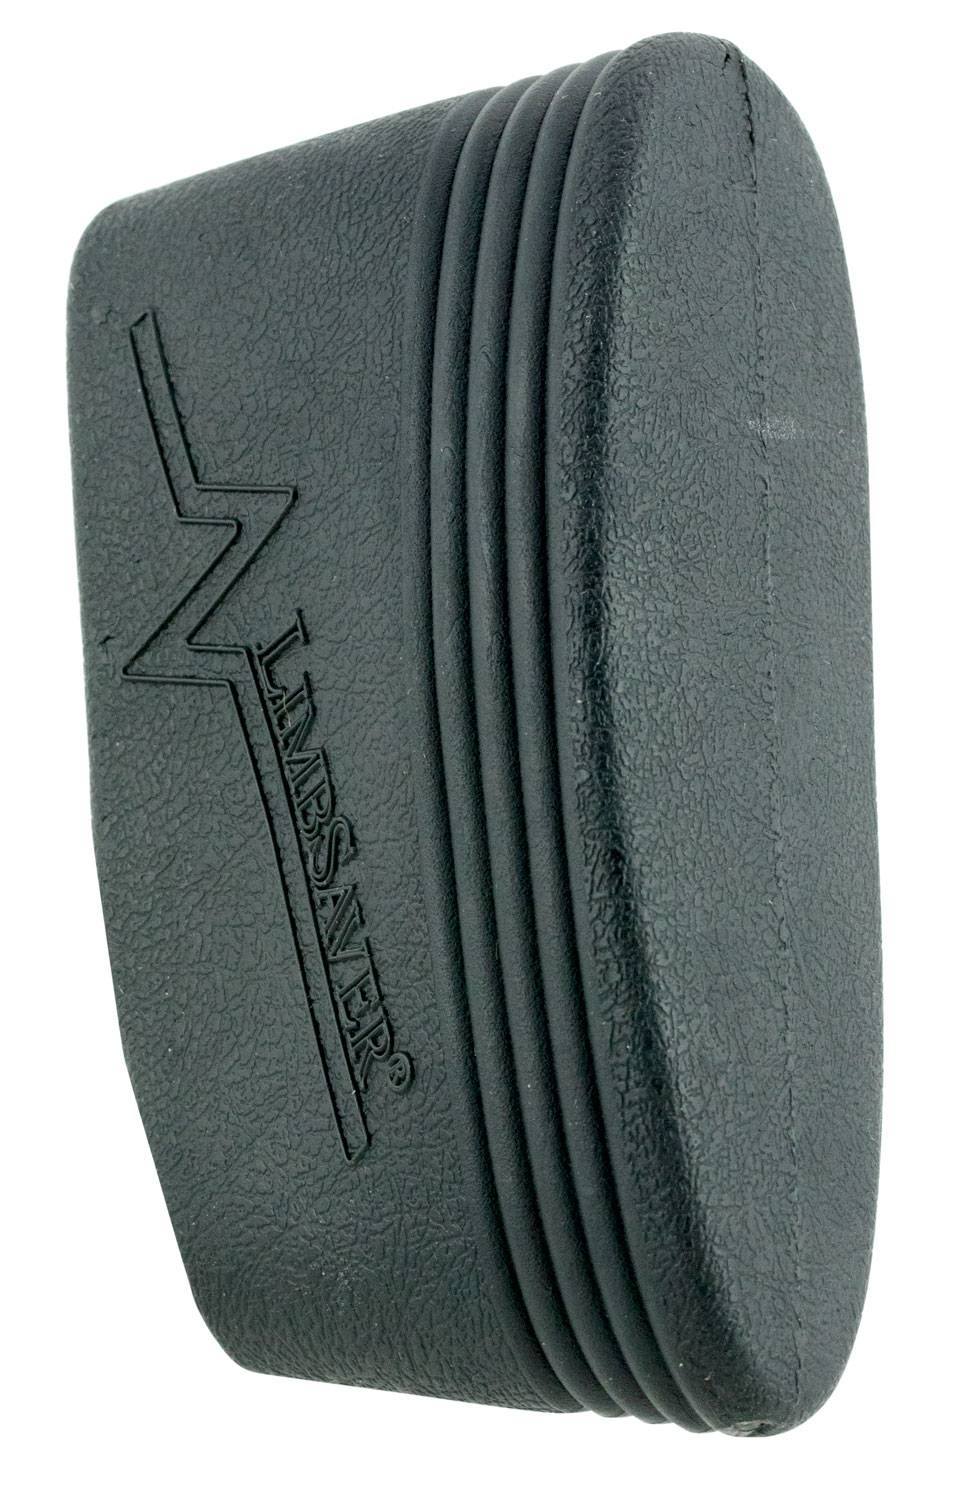 Limbsaver Recoil Pad Fit Chart